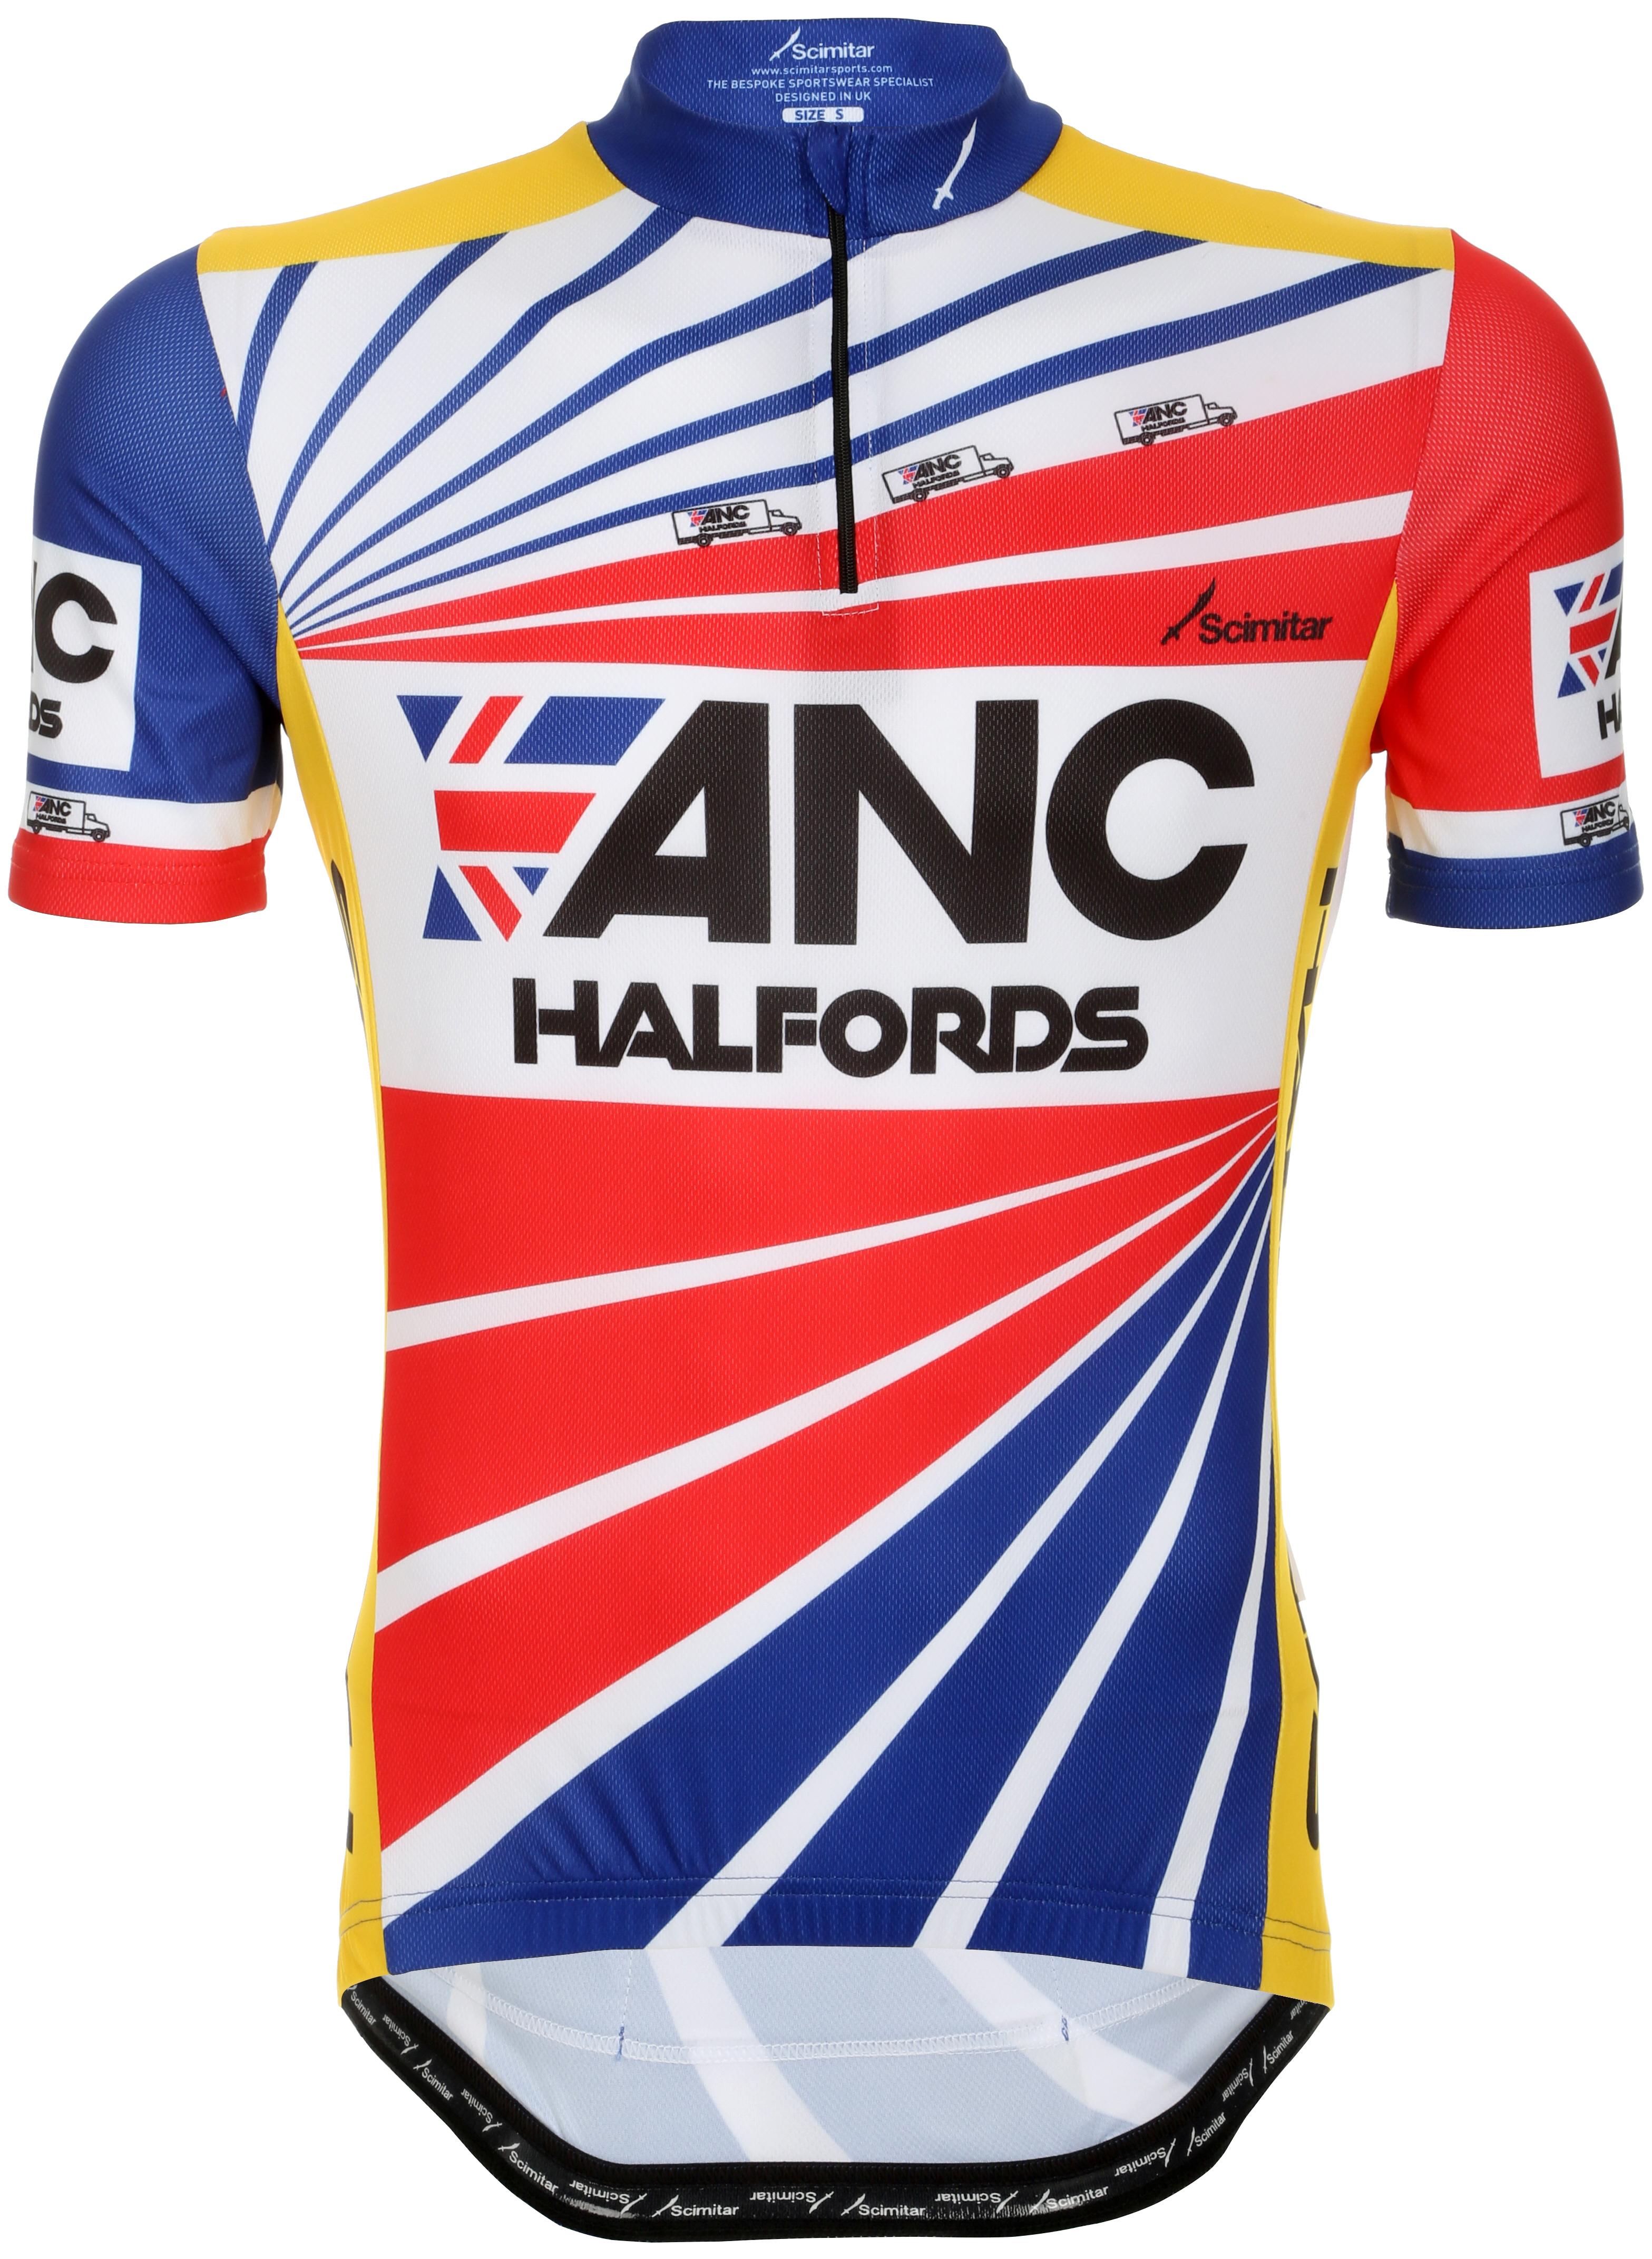 Anc Halfords Retro Cycling Jersey, M